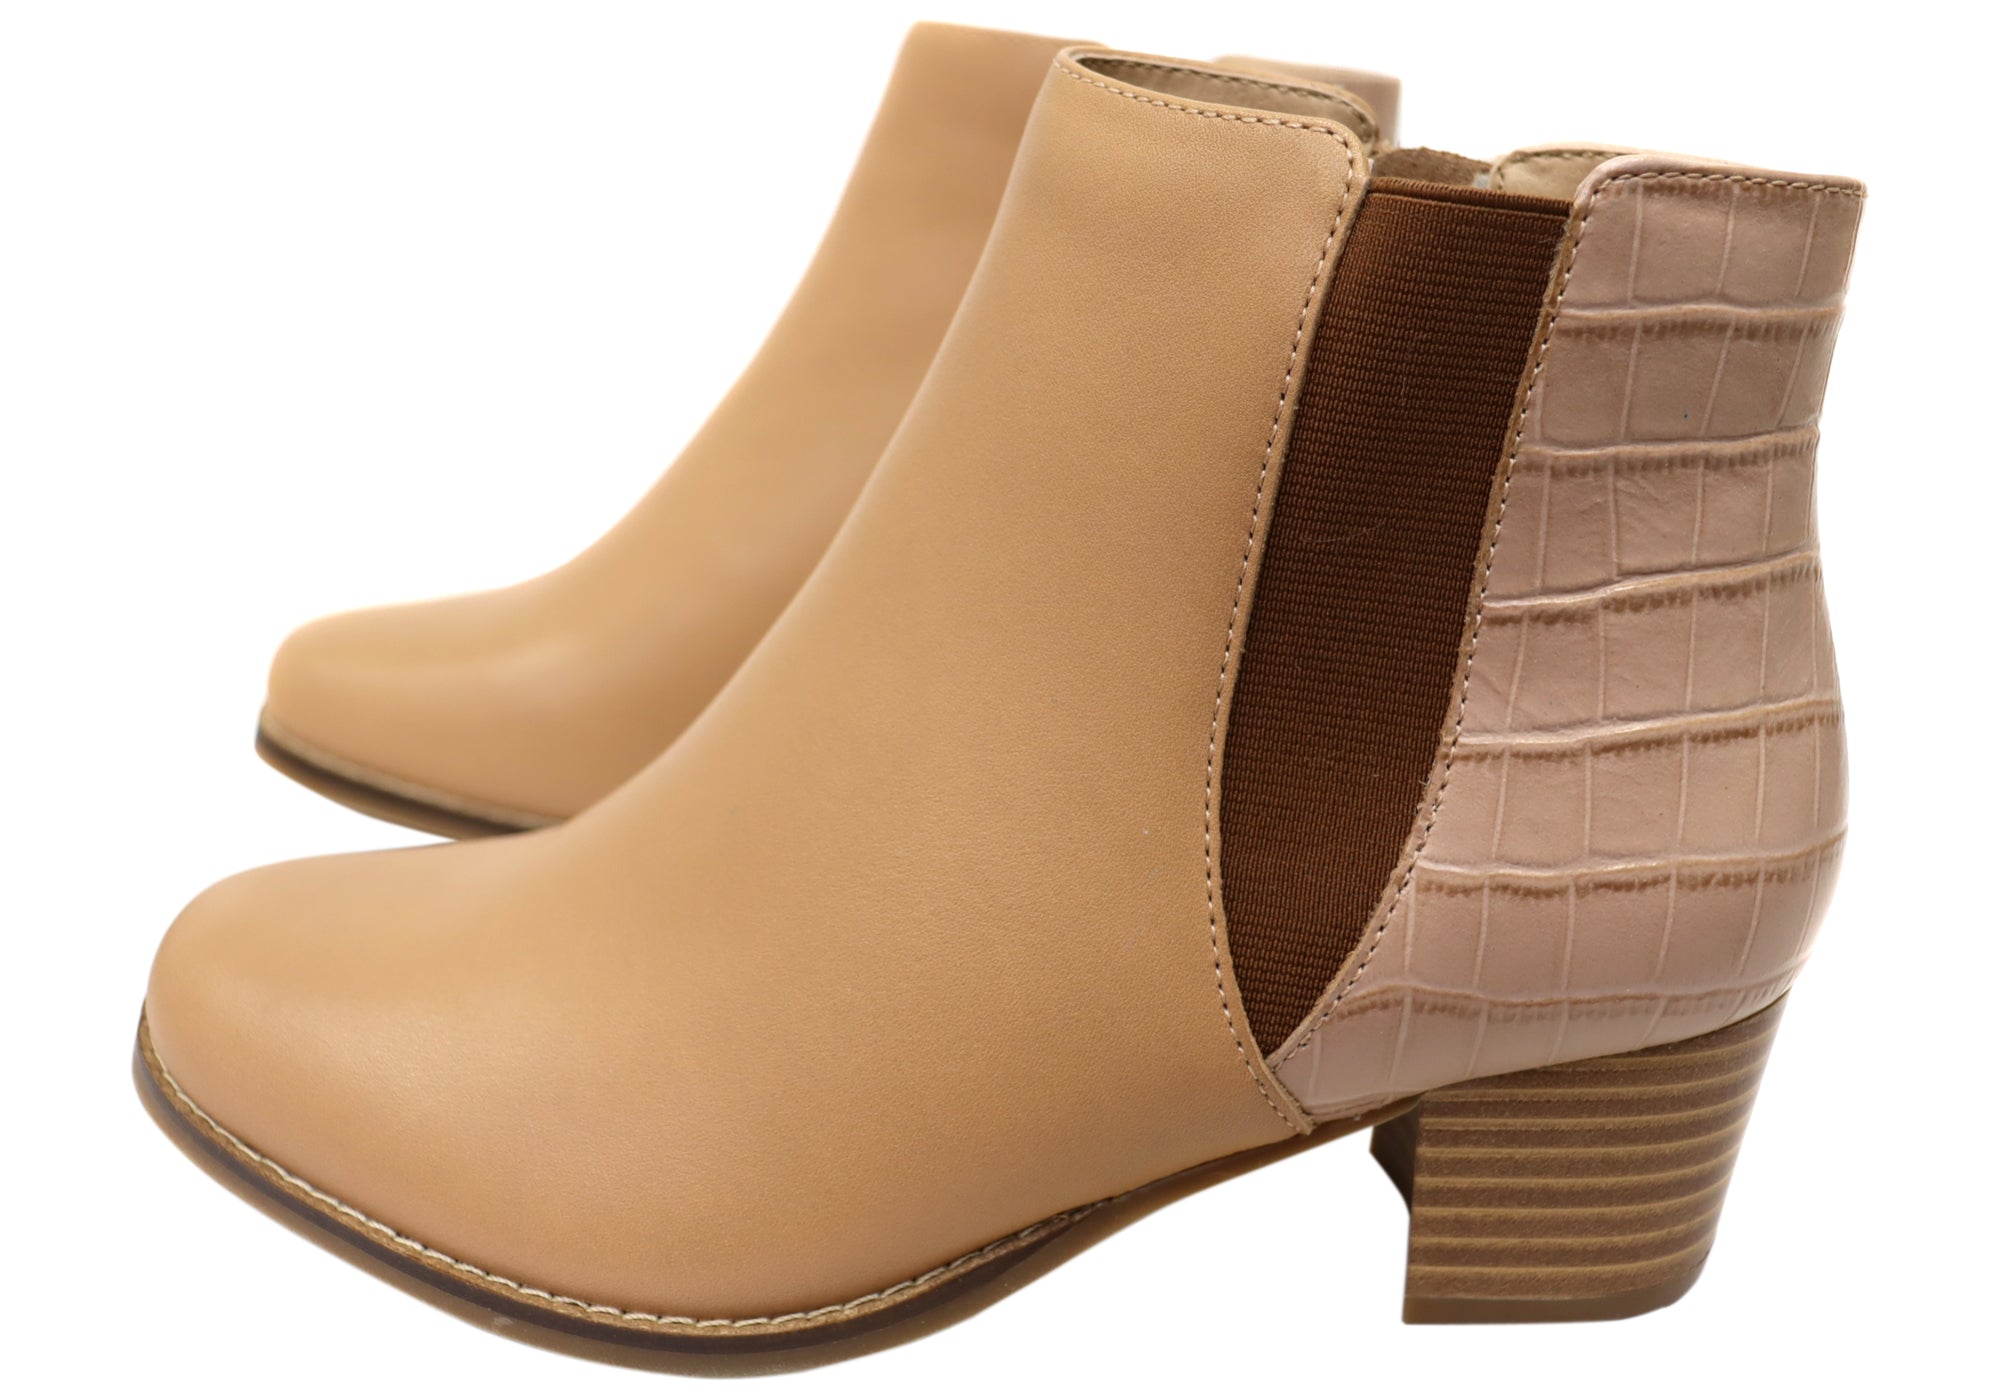 Scholl Orthaheel Heaven Womens Comfortable Leather Ankle Boots